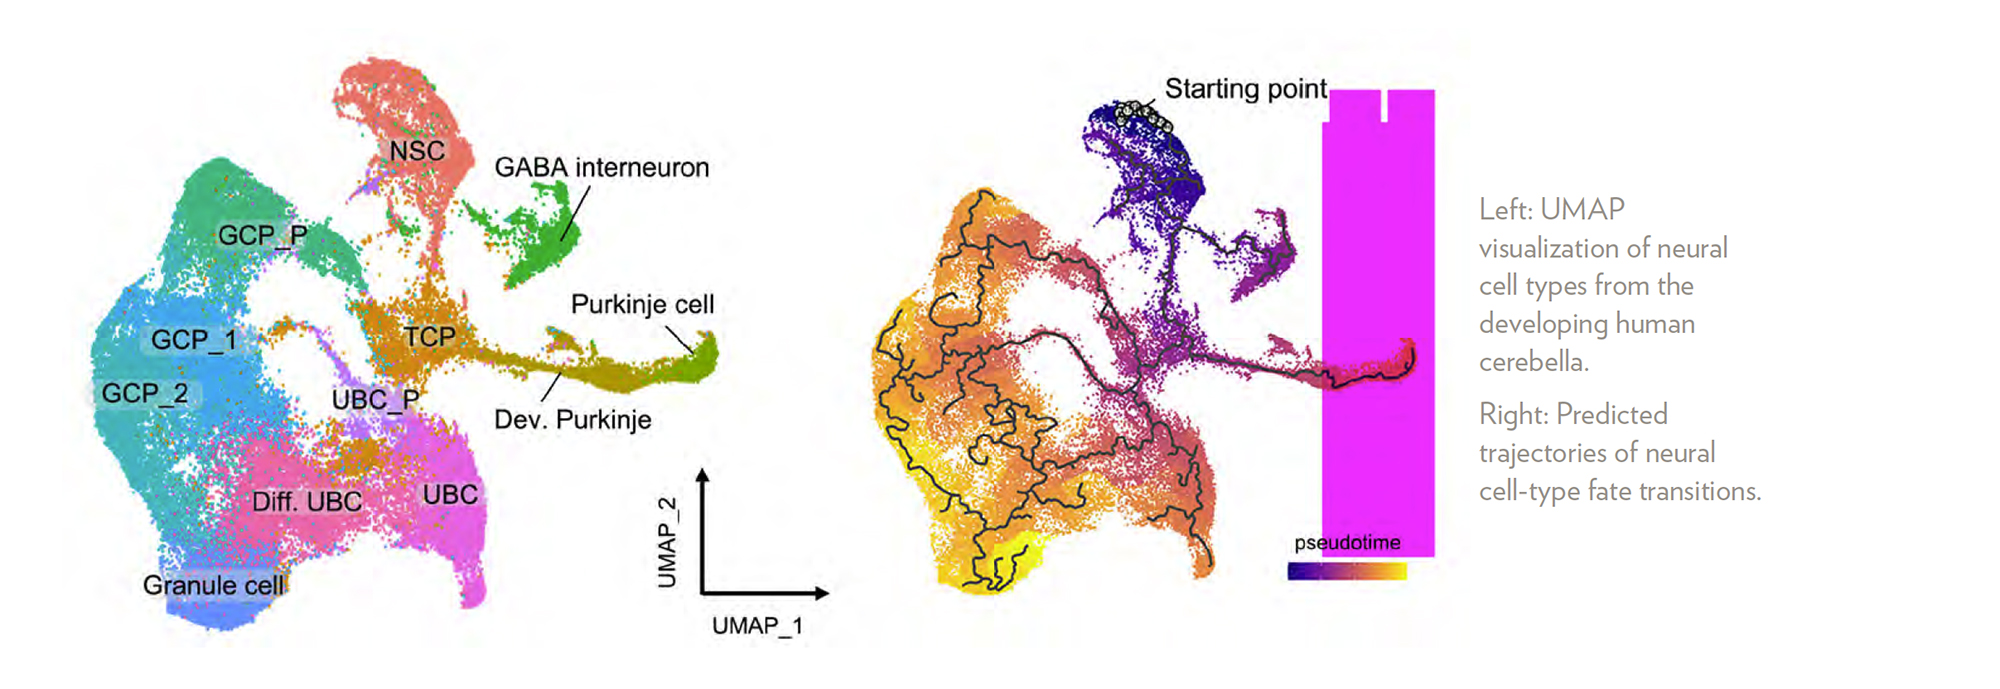 Left: UMAP visualization of neural cell types from the developing human cerebella. Right: Predicted trajectories of neural cell-type fate transitions.